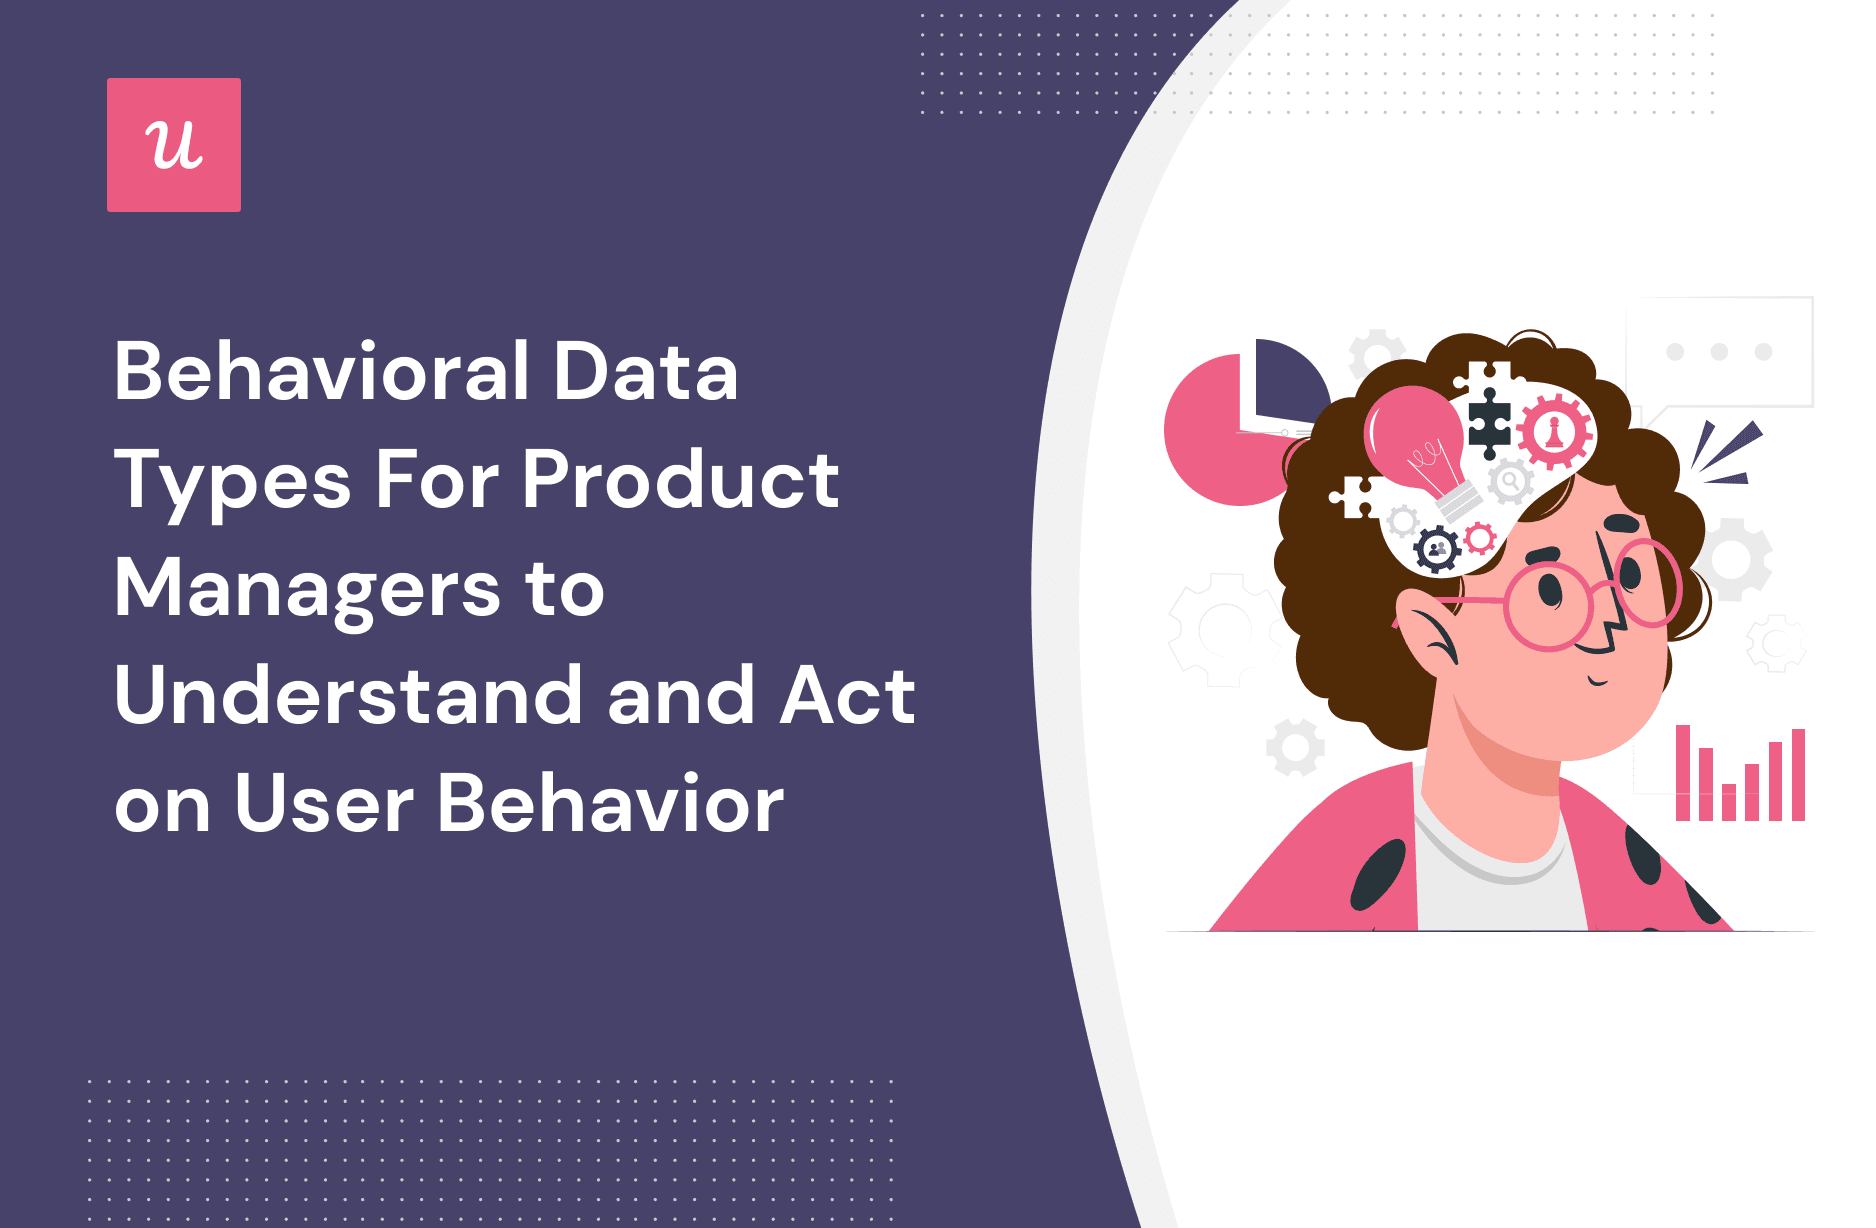 Behavioral Data Types For Product Managers to Understand And Act on User Behavior cover